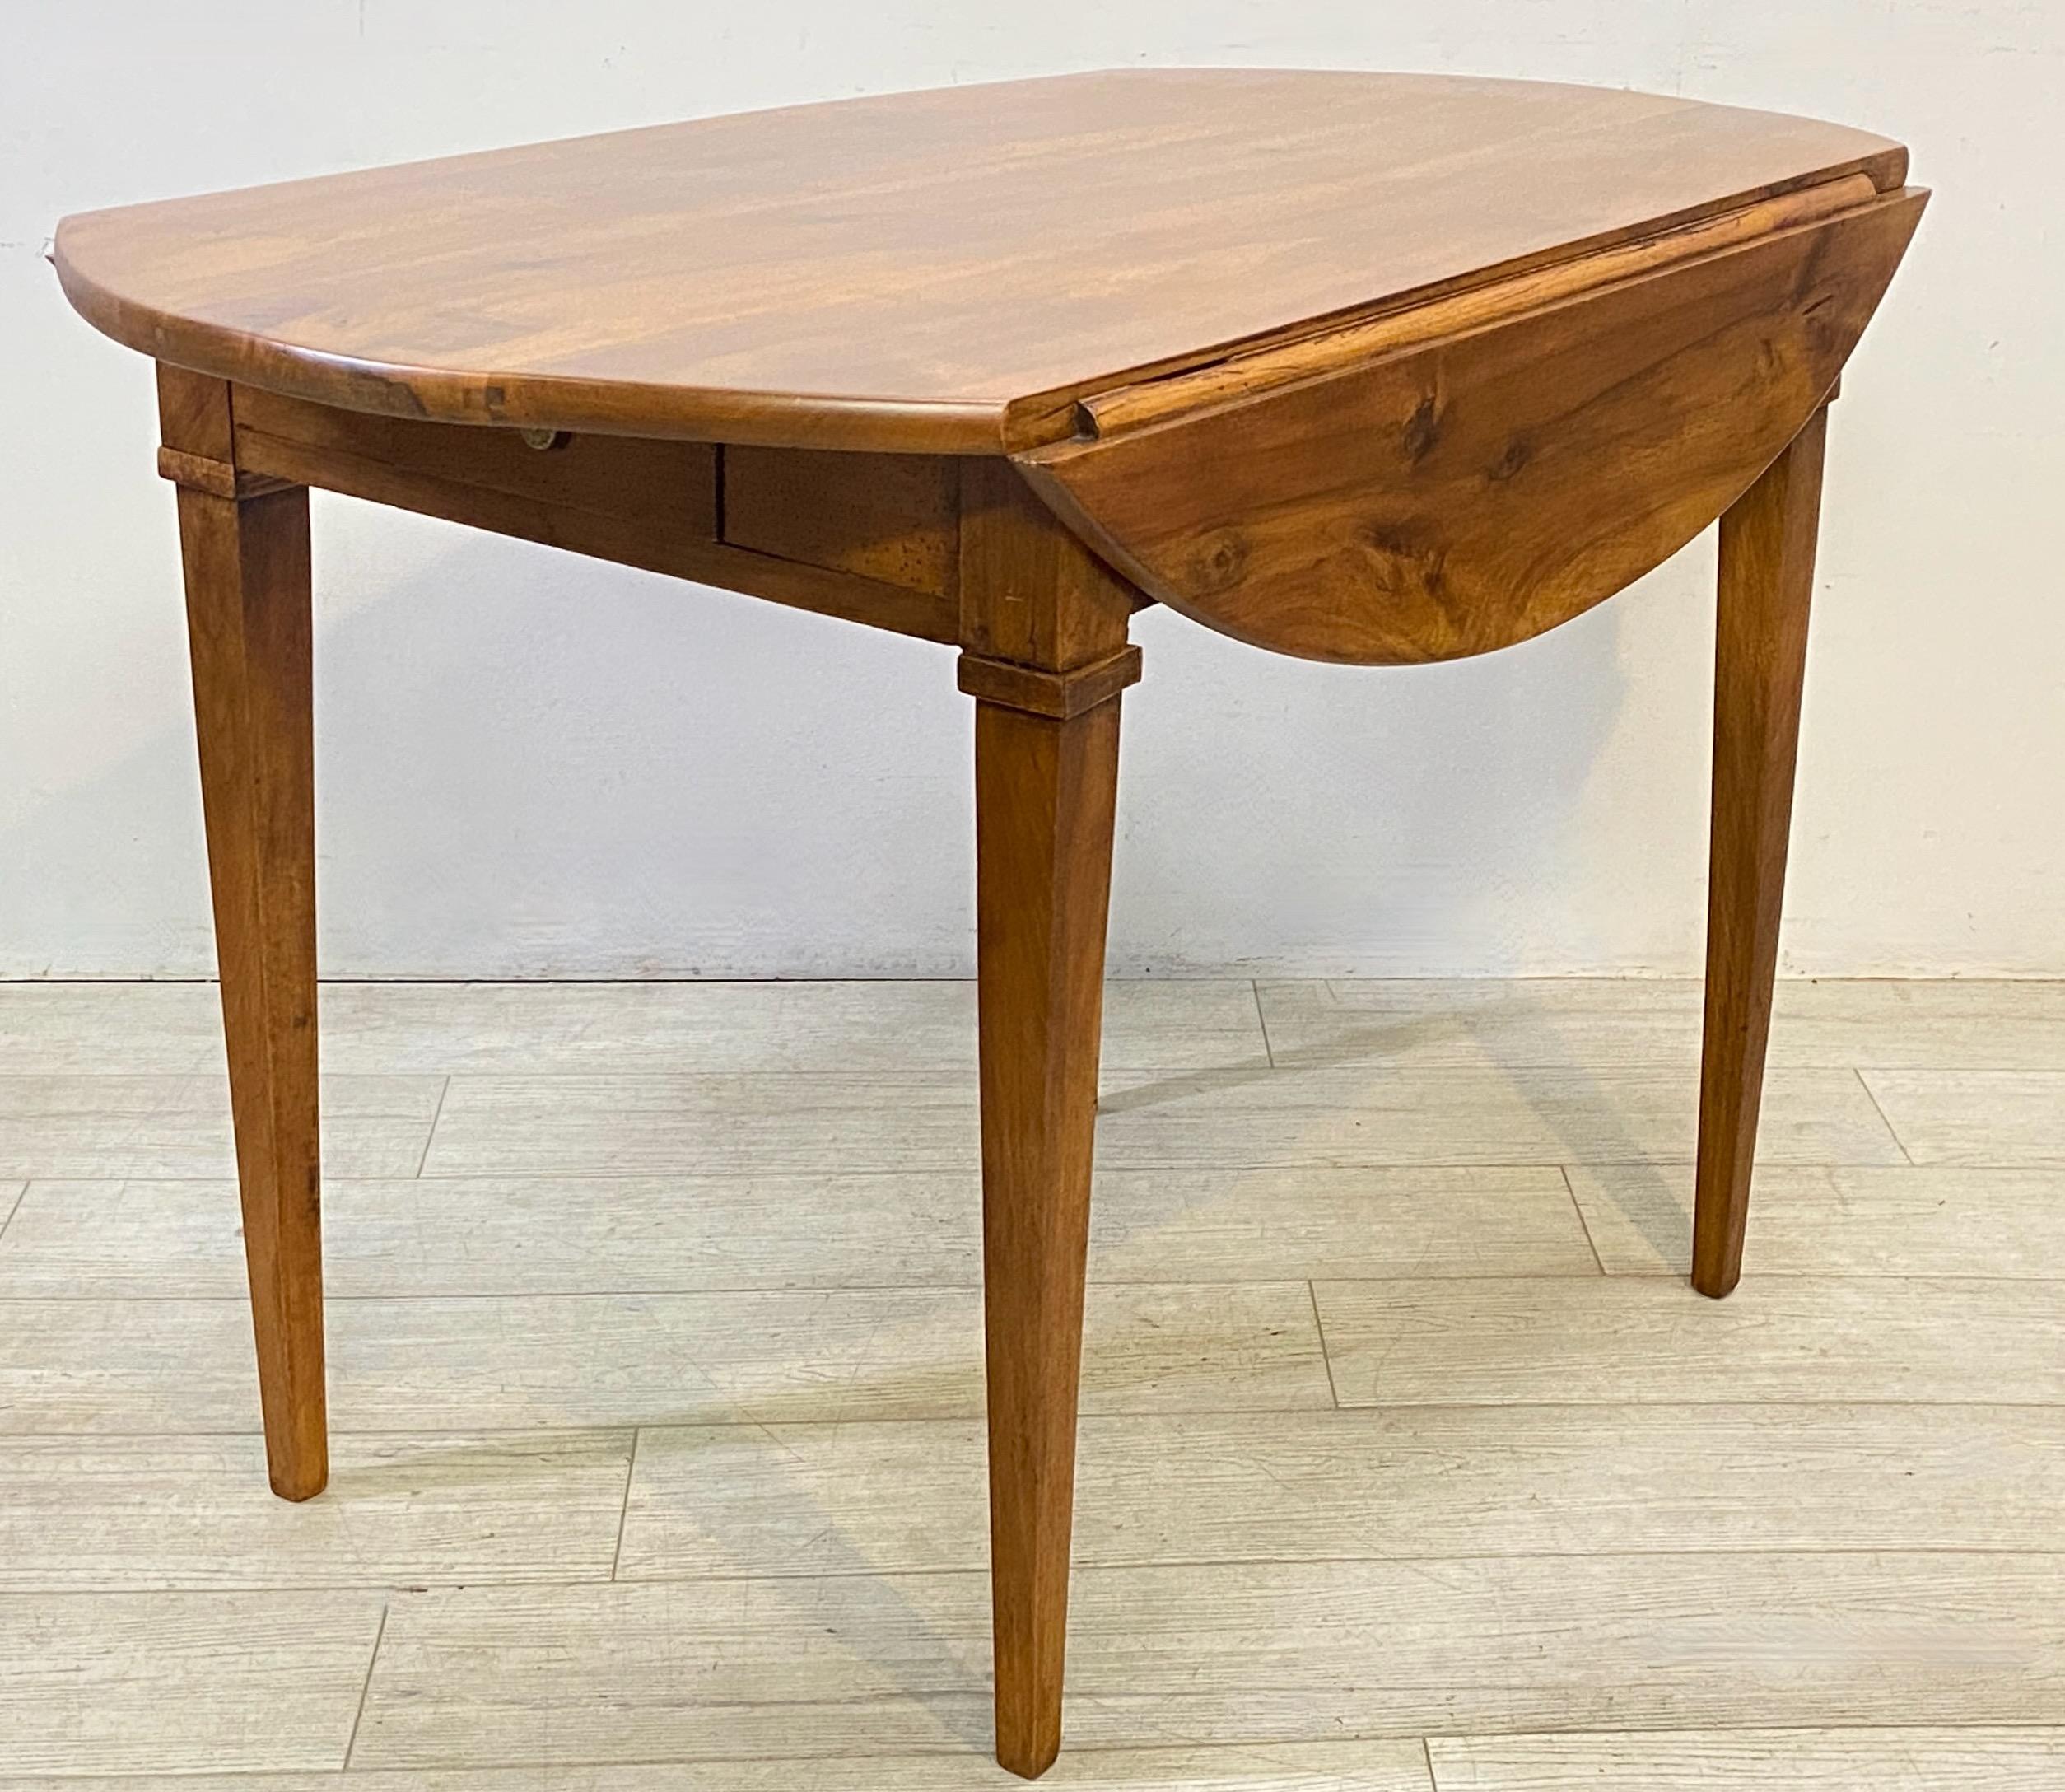 Rustic Early 19th C French Cherry Wood Elliptical Drop Leaf Dining Table, circa 1800 For Sale